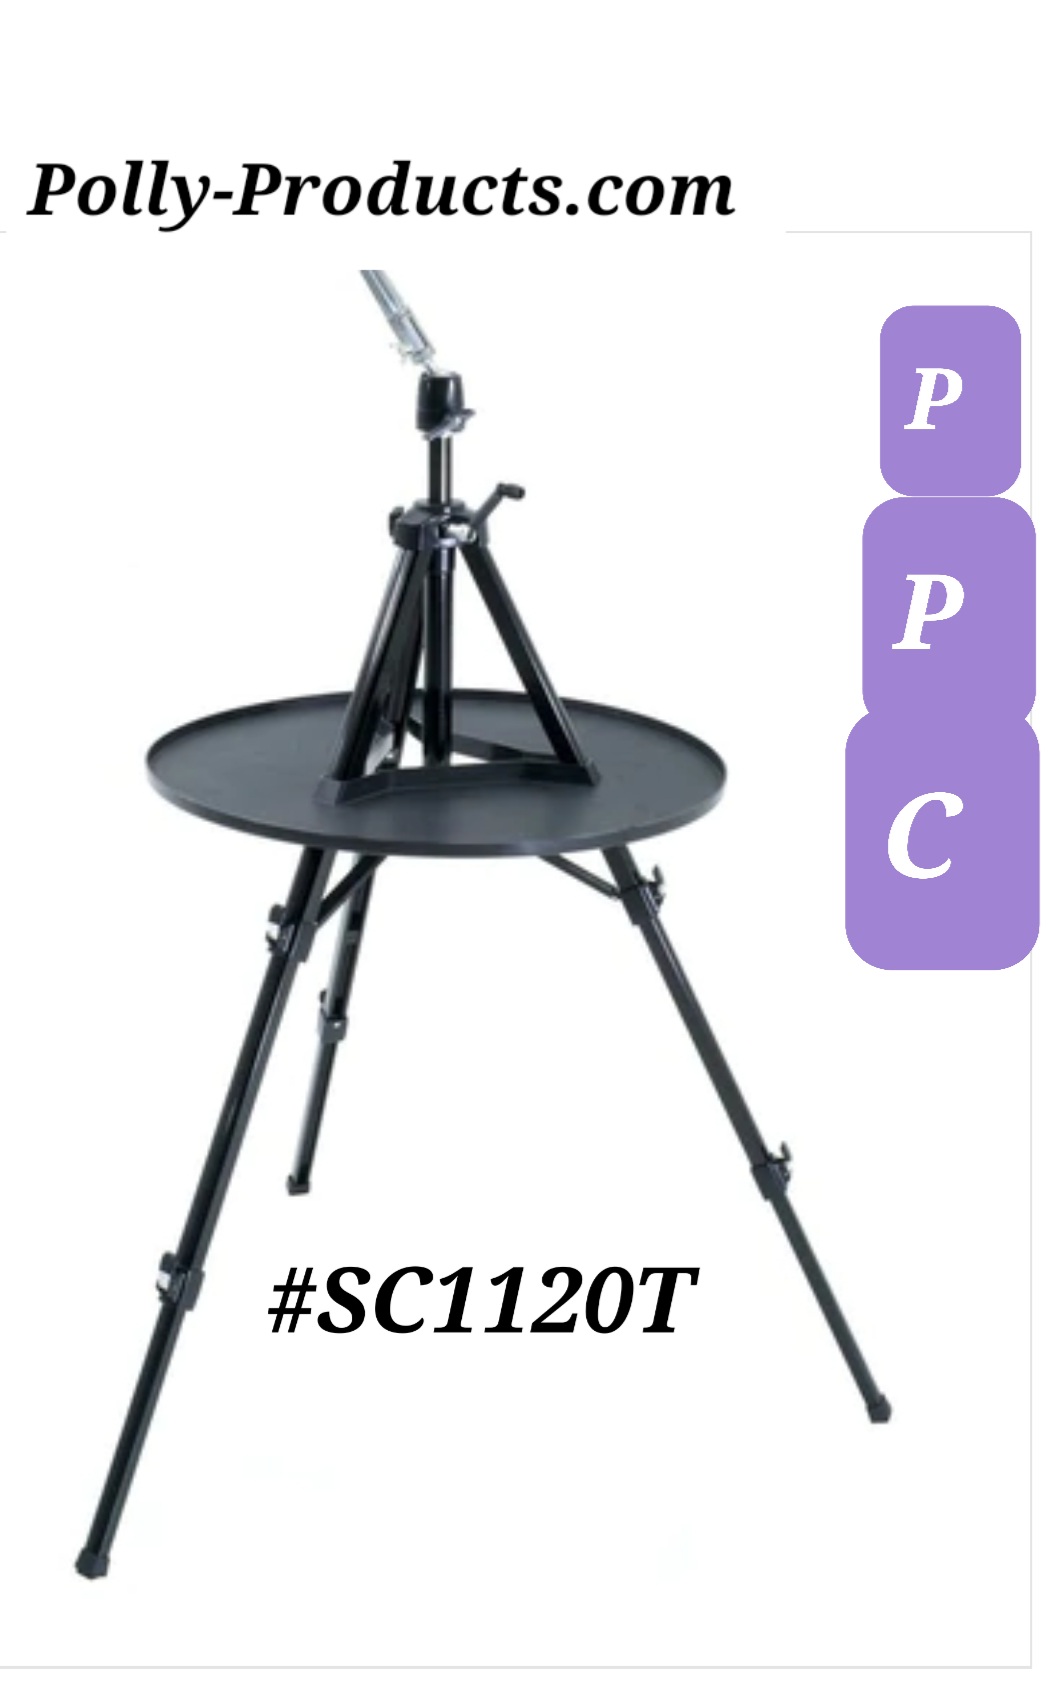 #SC1120T ADJUSTABLE HEIGHT DISPLAY STANDVWITH TRAY FROM POLLY PRODUCTS COMPANY 